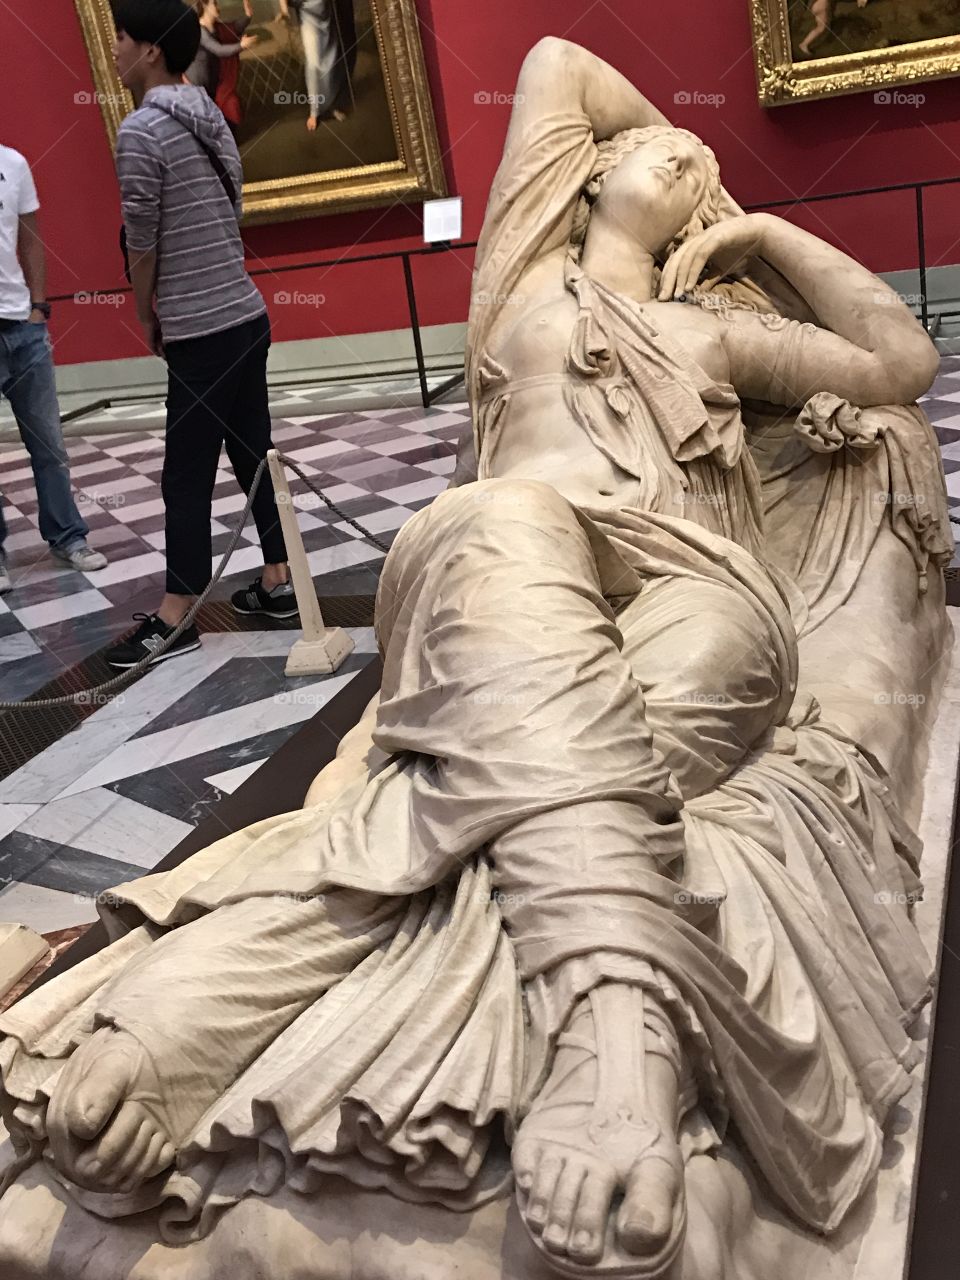 Ariadne, Goddess of the Labyrinth! This beauty of legend and myth, lays in the halls of Uffizi, Florence, returning in 2012 after 200 years. Stylish and timeless The Sleeping Ariadne is 1800 years old, a magnificent 3rd Century piece of antiquity.